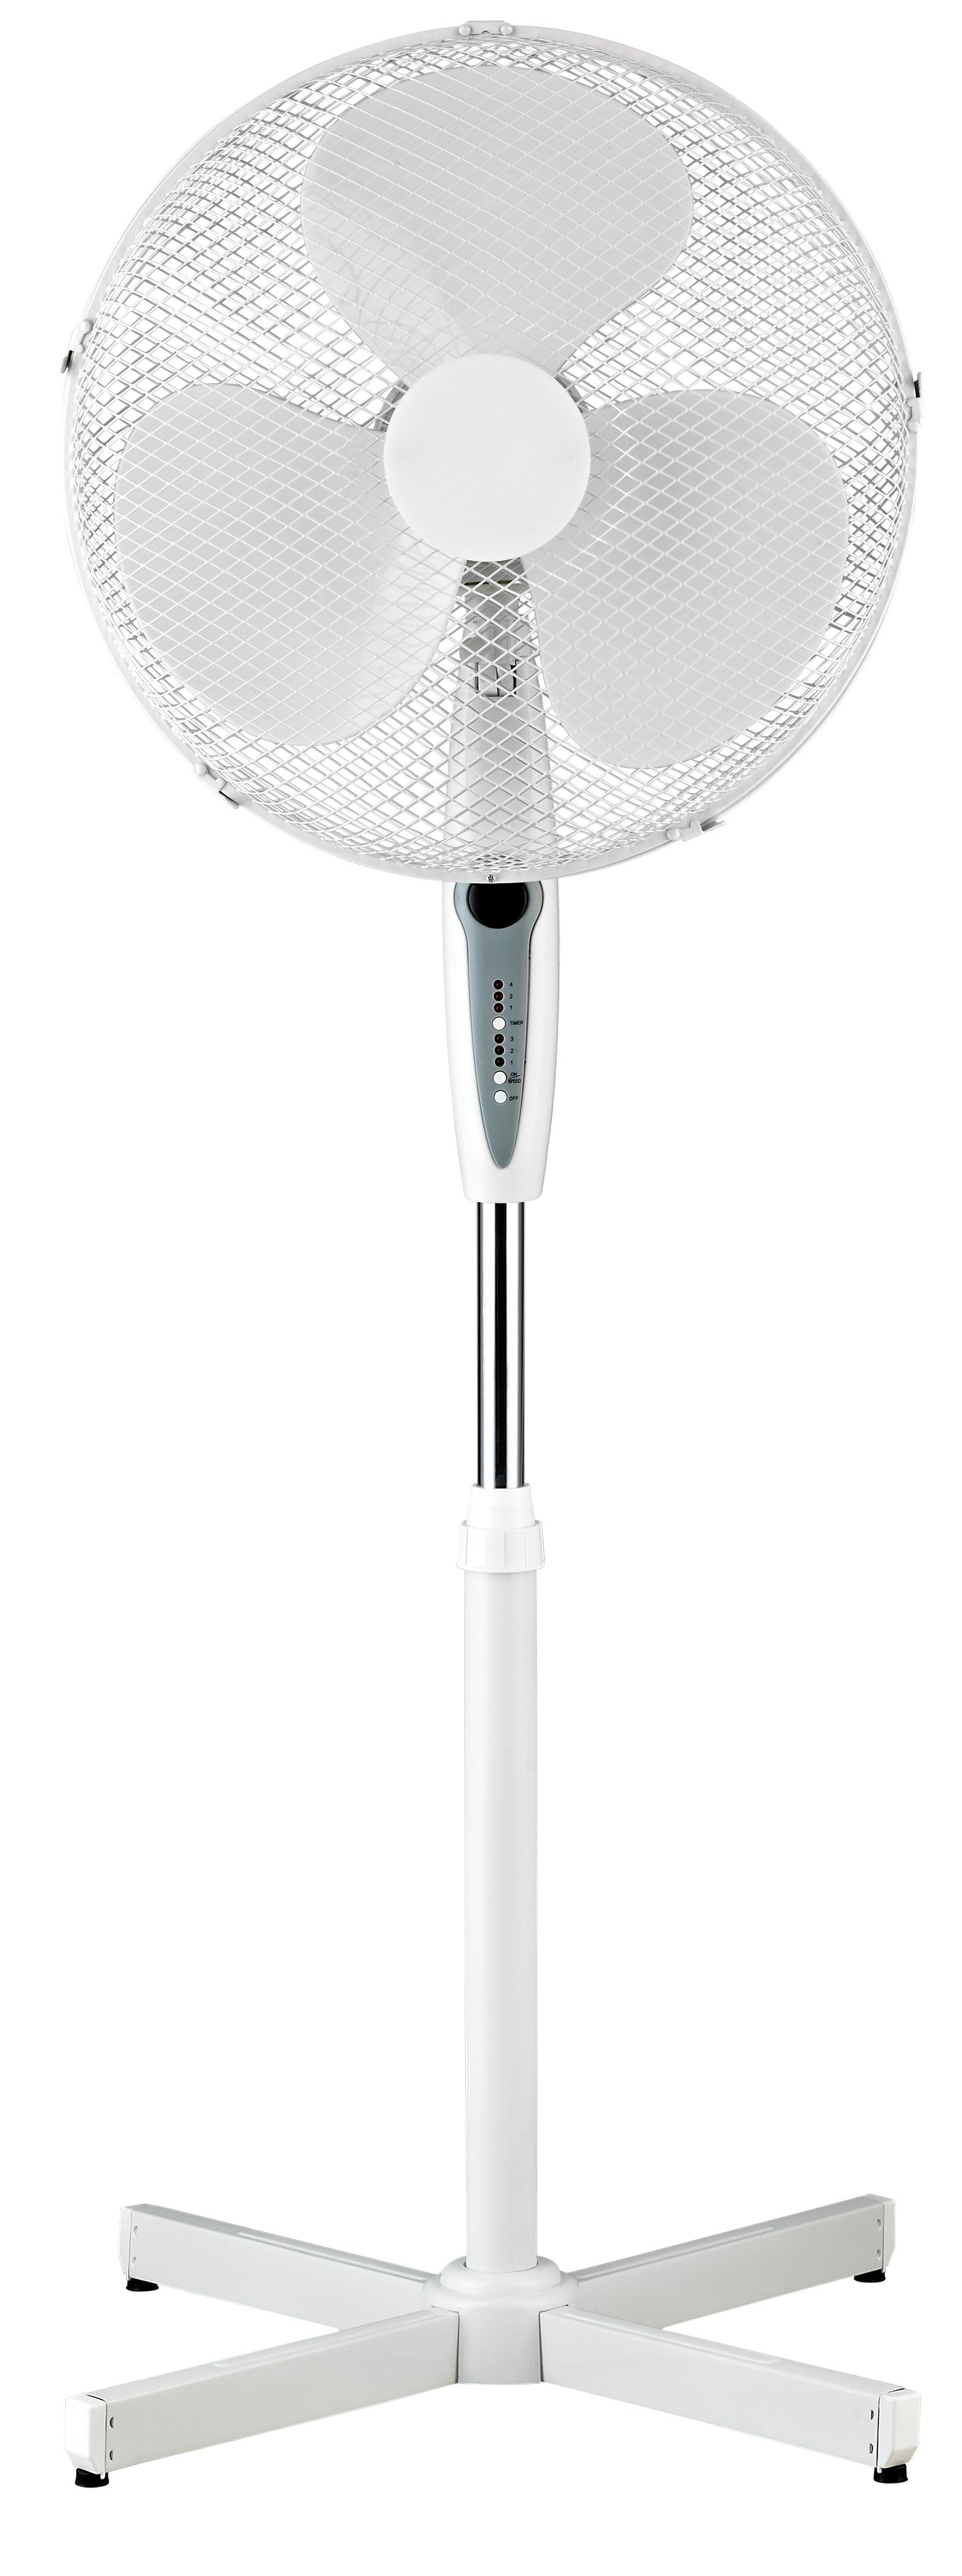 Pedestal Fan with Remote Control, 16'', 3 Speed, 1-4 Hours Timer